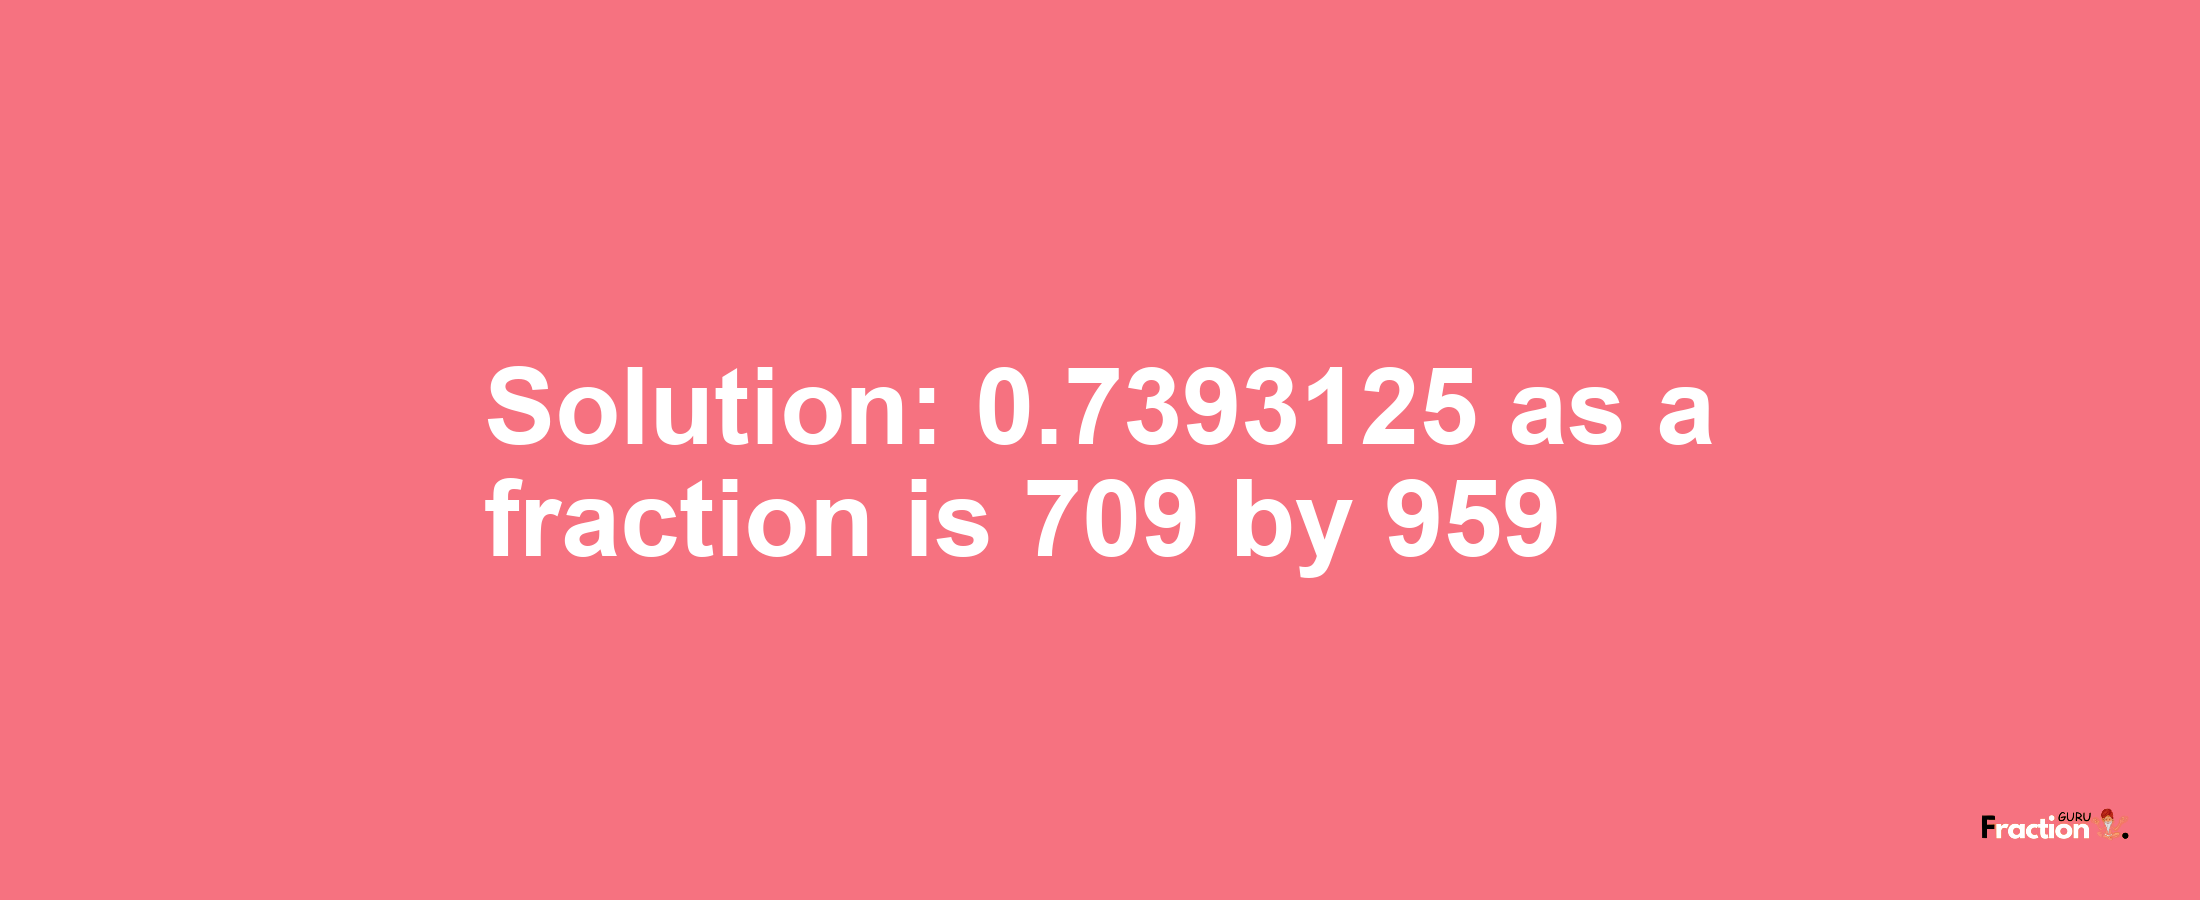 Solution:0.7393125 as a fraction is 709/959